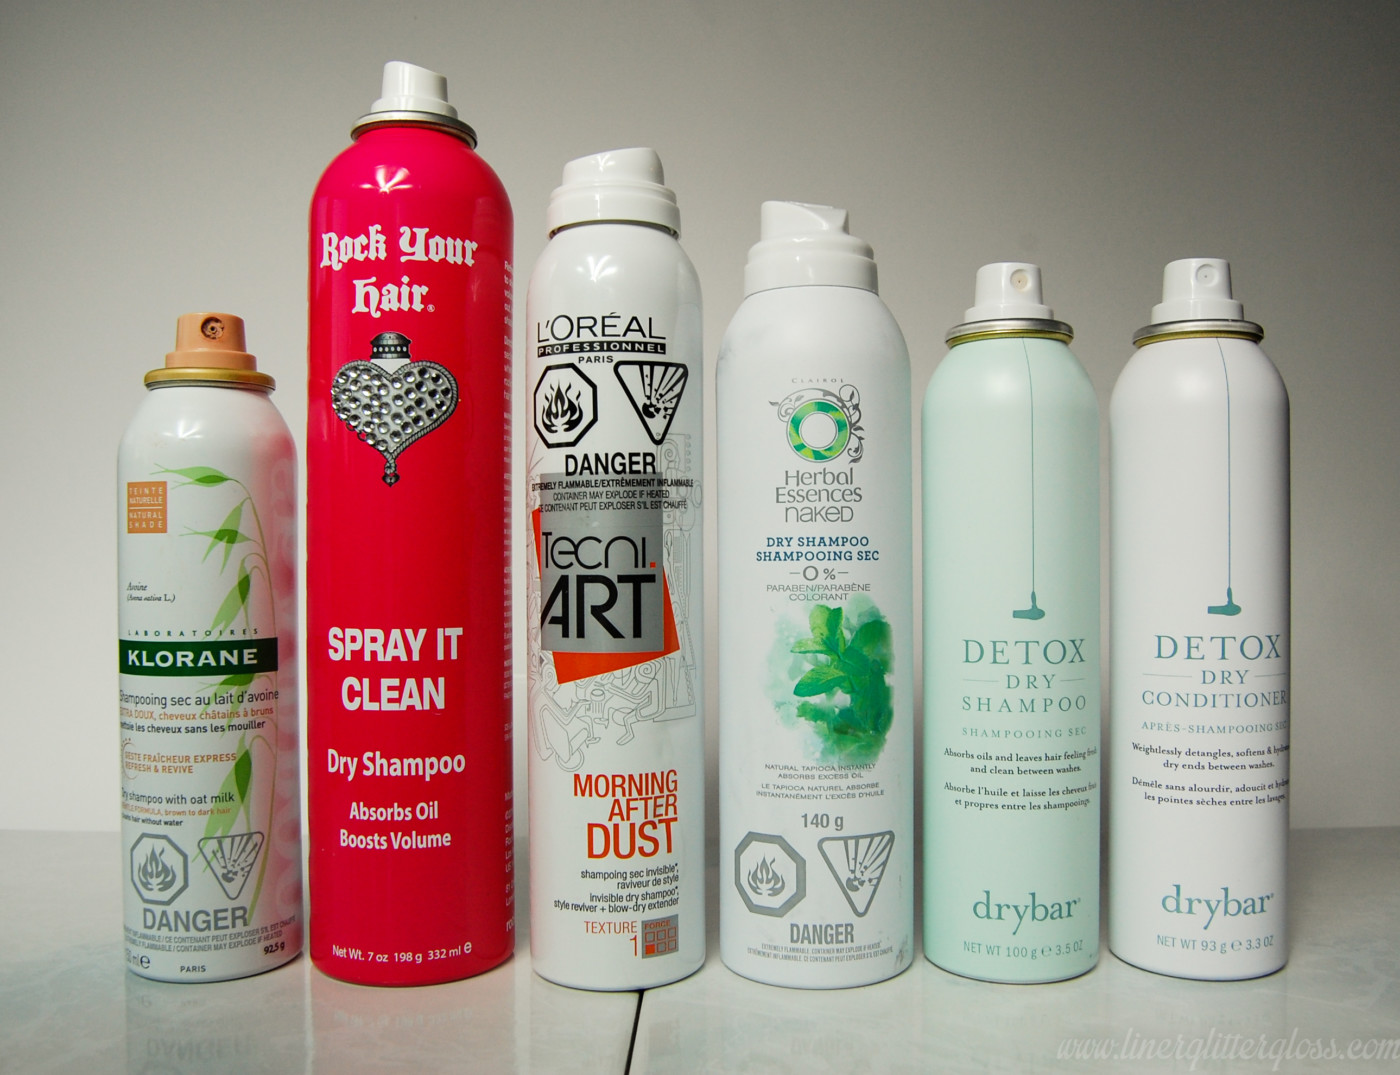 best dry shampoo, which dry shampoo should i try, does dry shampoo work, how to refresh your hair, how to make your hair look clean, oily hair fix, rock your hair spray it clean, rock your hair dry shampoo, l'oreal professionnel morning after dust, drybar detox dry shampoo, drybar detox dry conditioner, klorance dry shampoo, herbal essences naked dry shampoo, drugstore dry shampoo